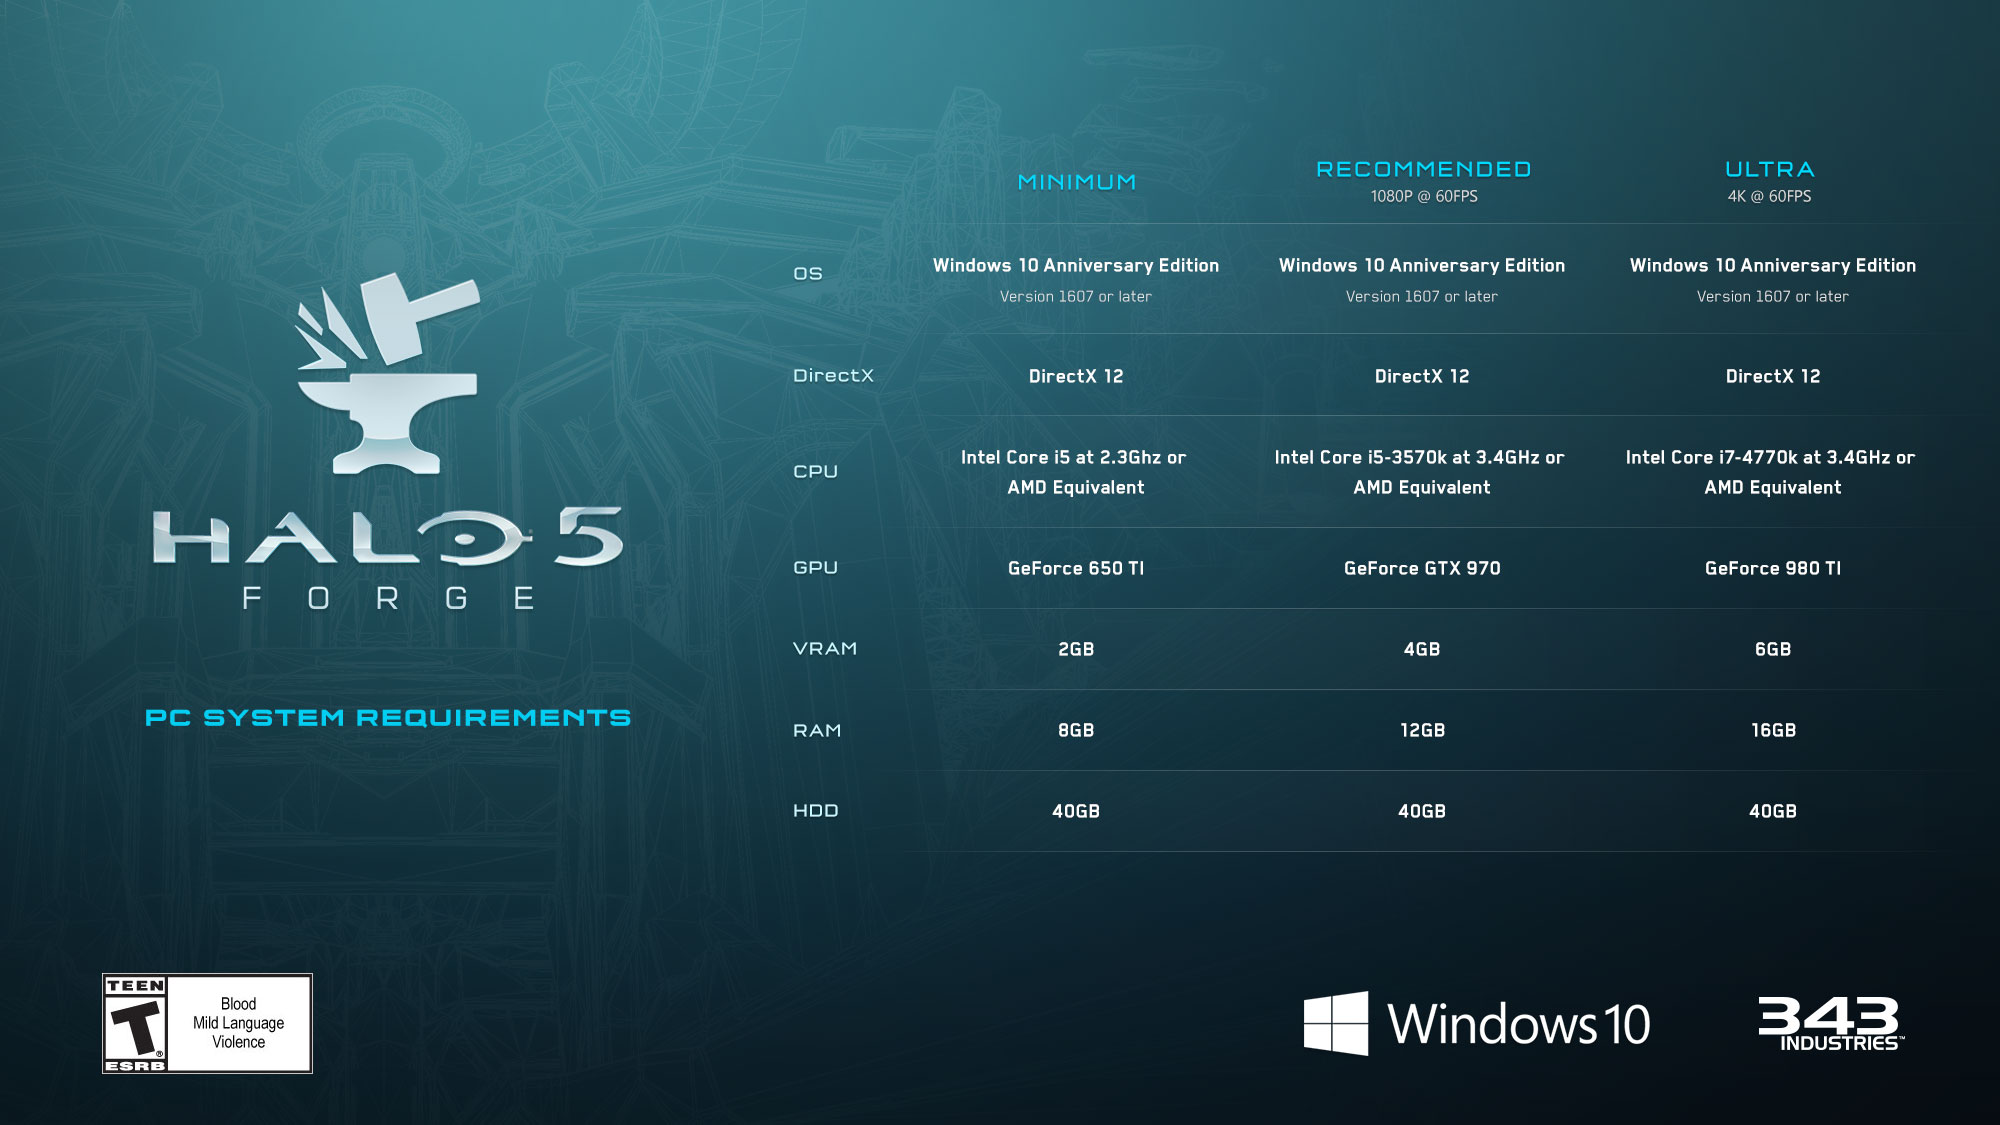 Media asset in full size related to 3dfxzone.it news item entitled as follows: Da Microsoft e 343 Industries i requisiti di sistema per Halo 5: Forge su PC | Image Name: news24848_Halo-5-Forge-System-Requirements_1.jpg